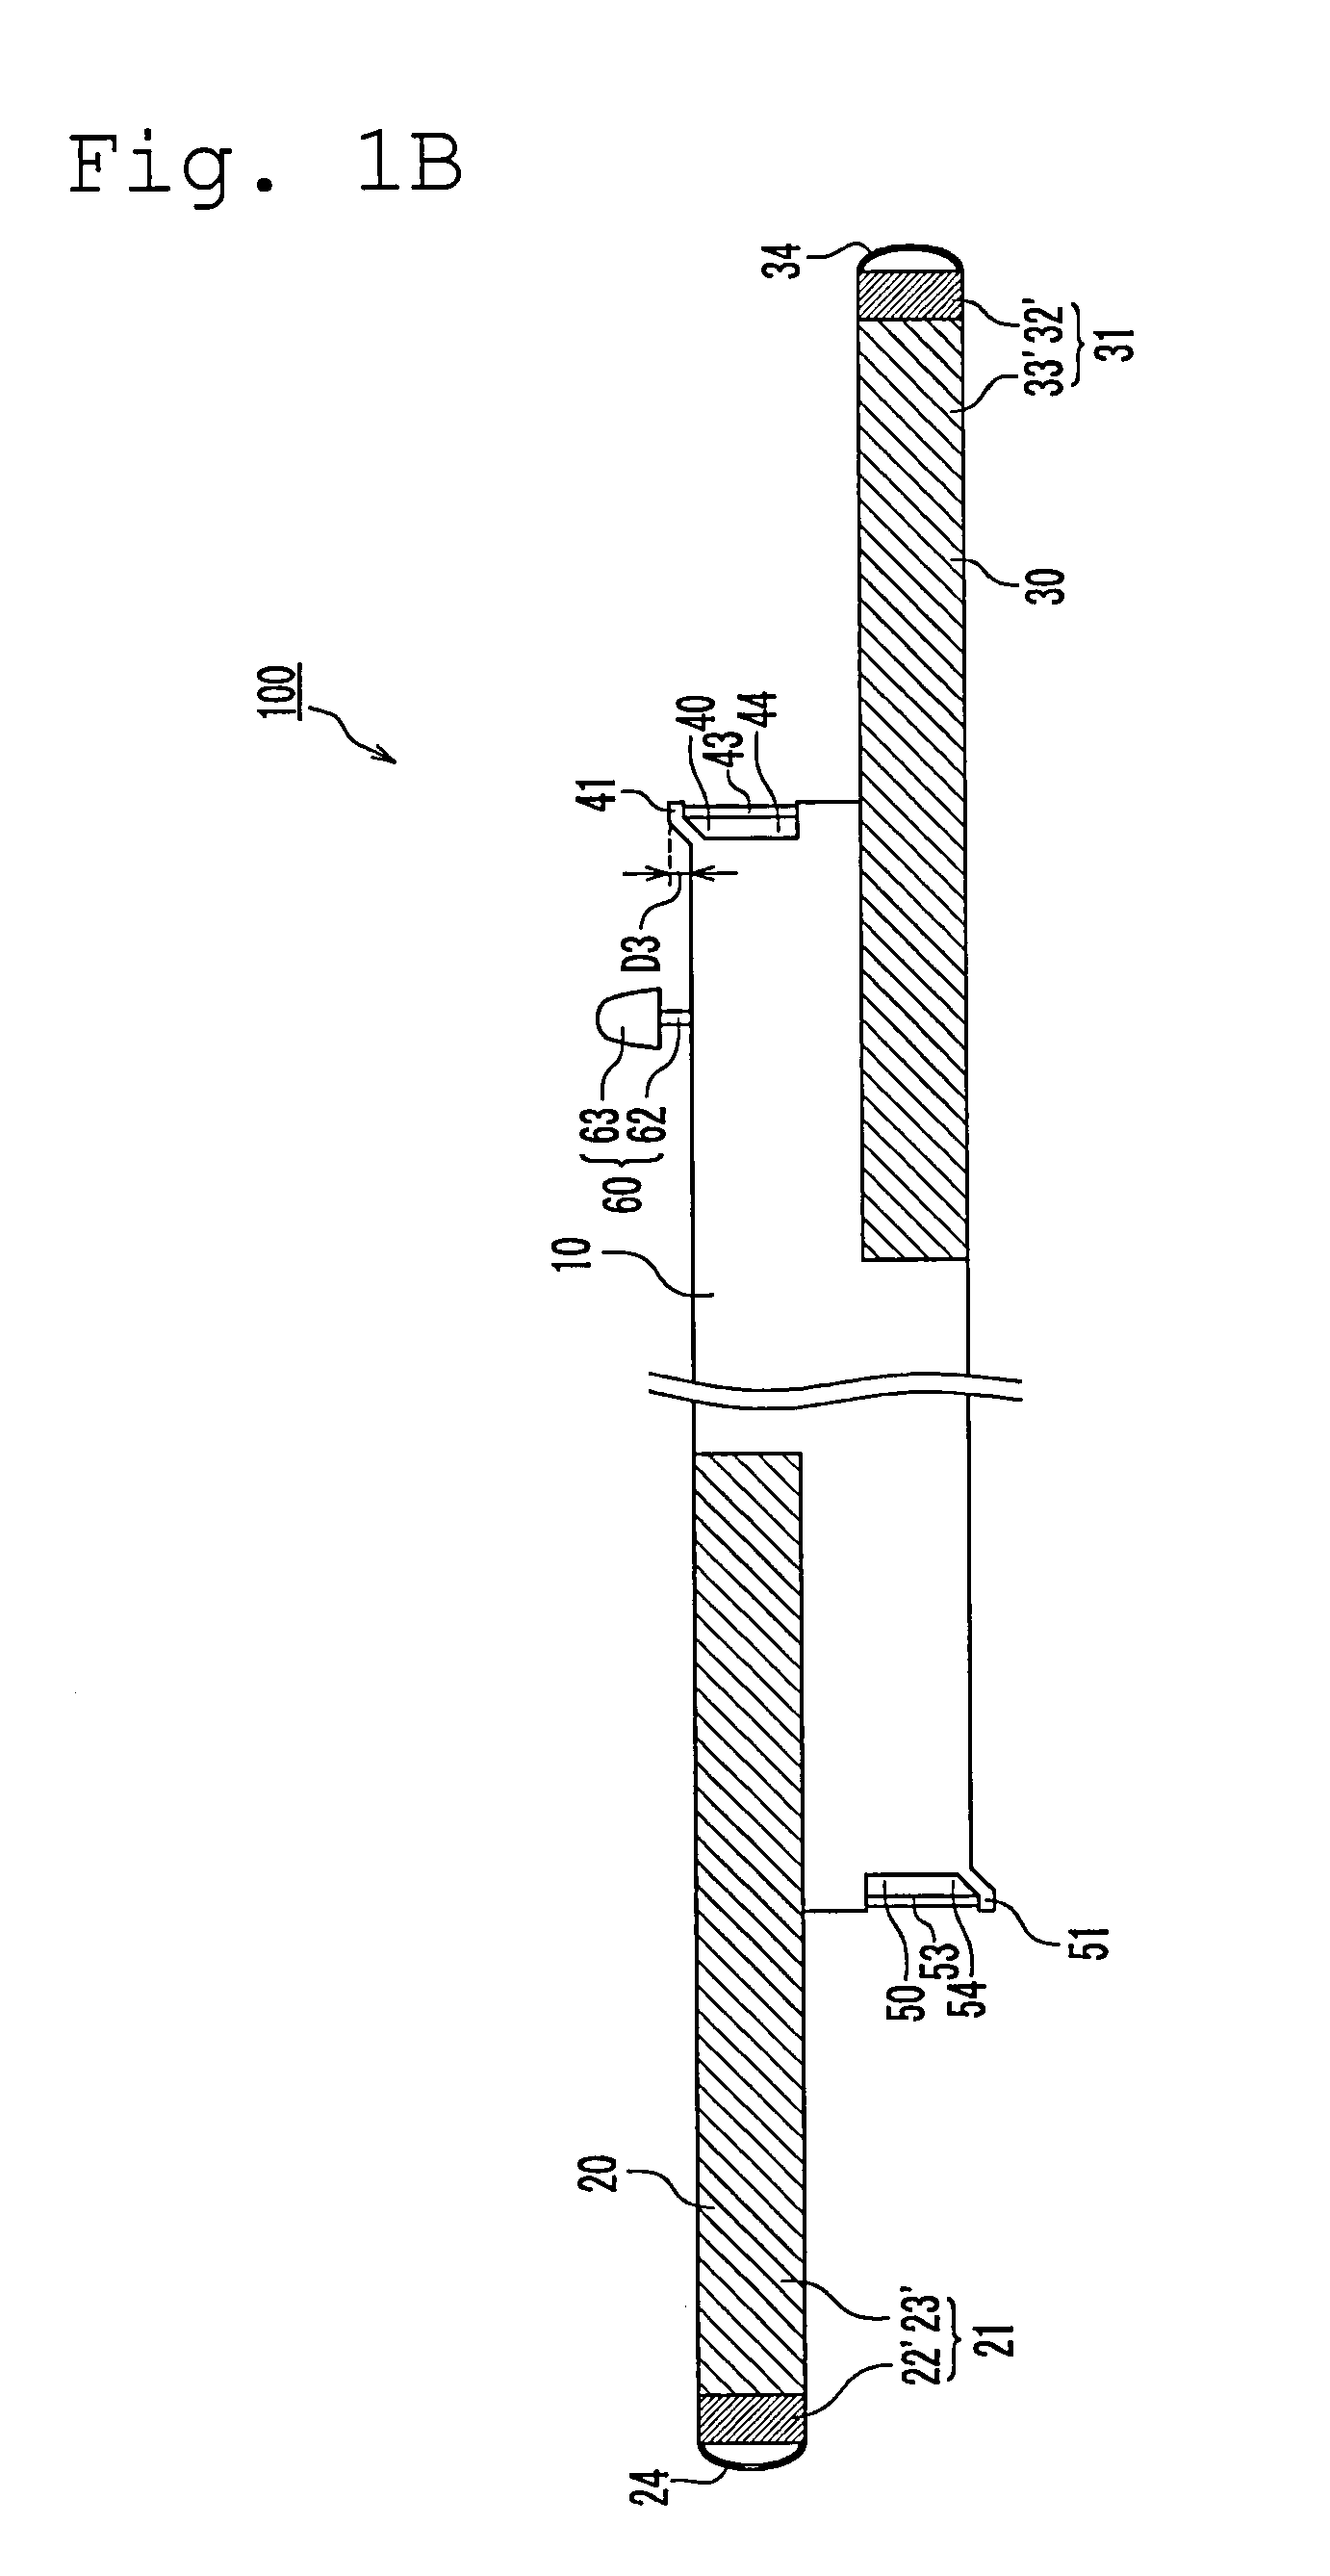 Load fixing device